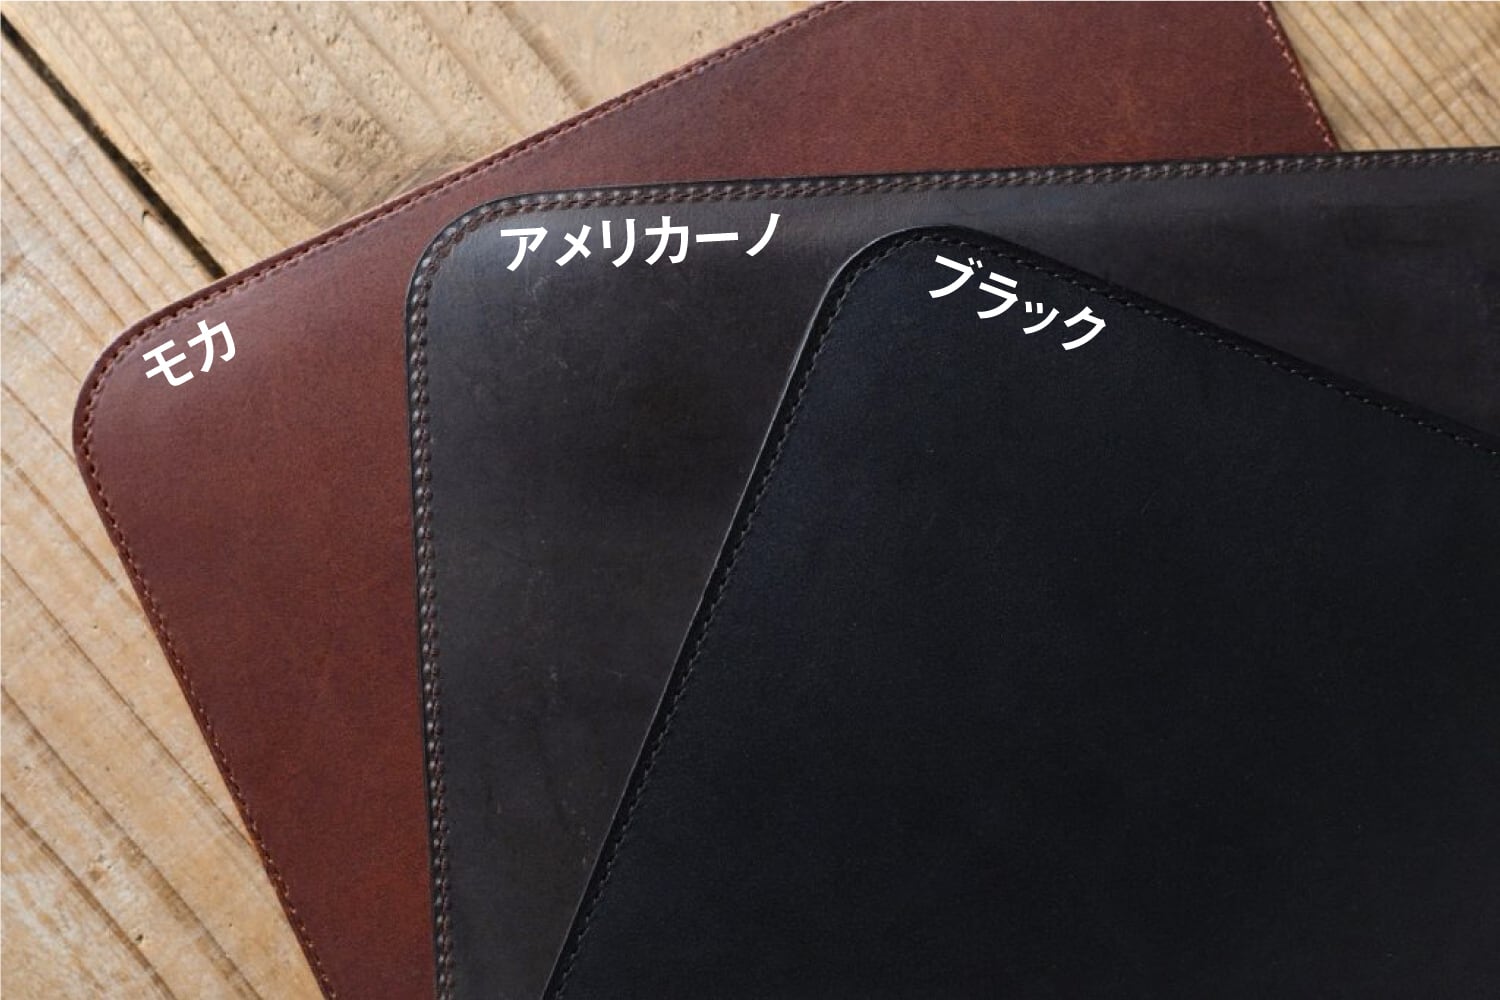 UPDATE｜No.02_Leather MacBook Case【13インチ】 | drip公式オンラインショップ powered by BASE